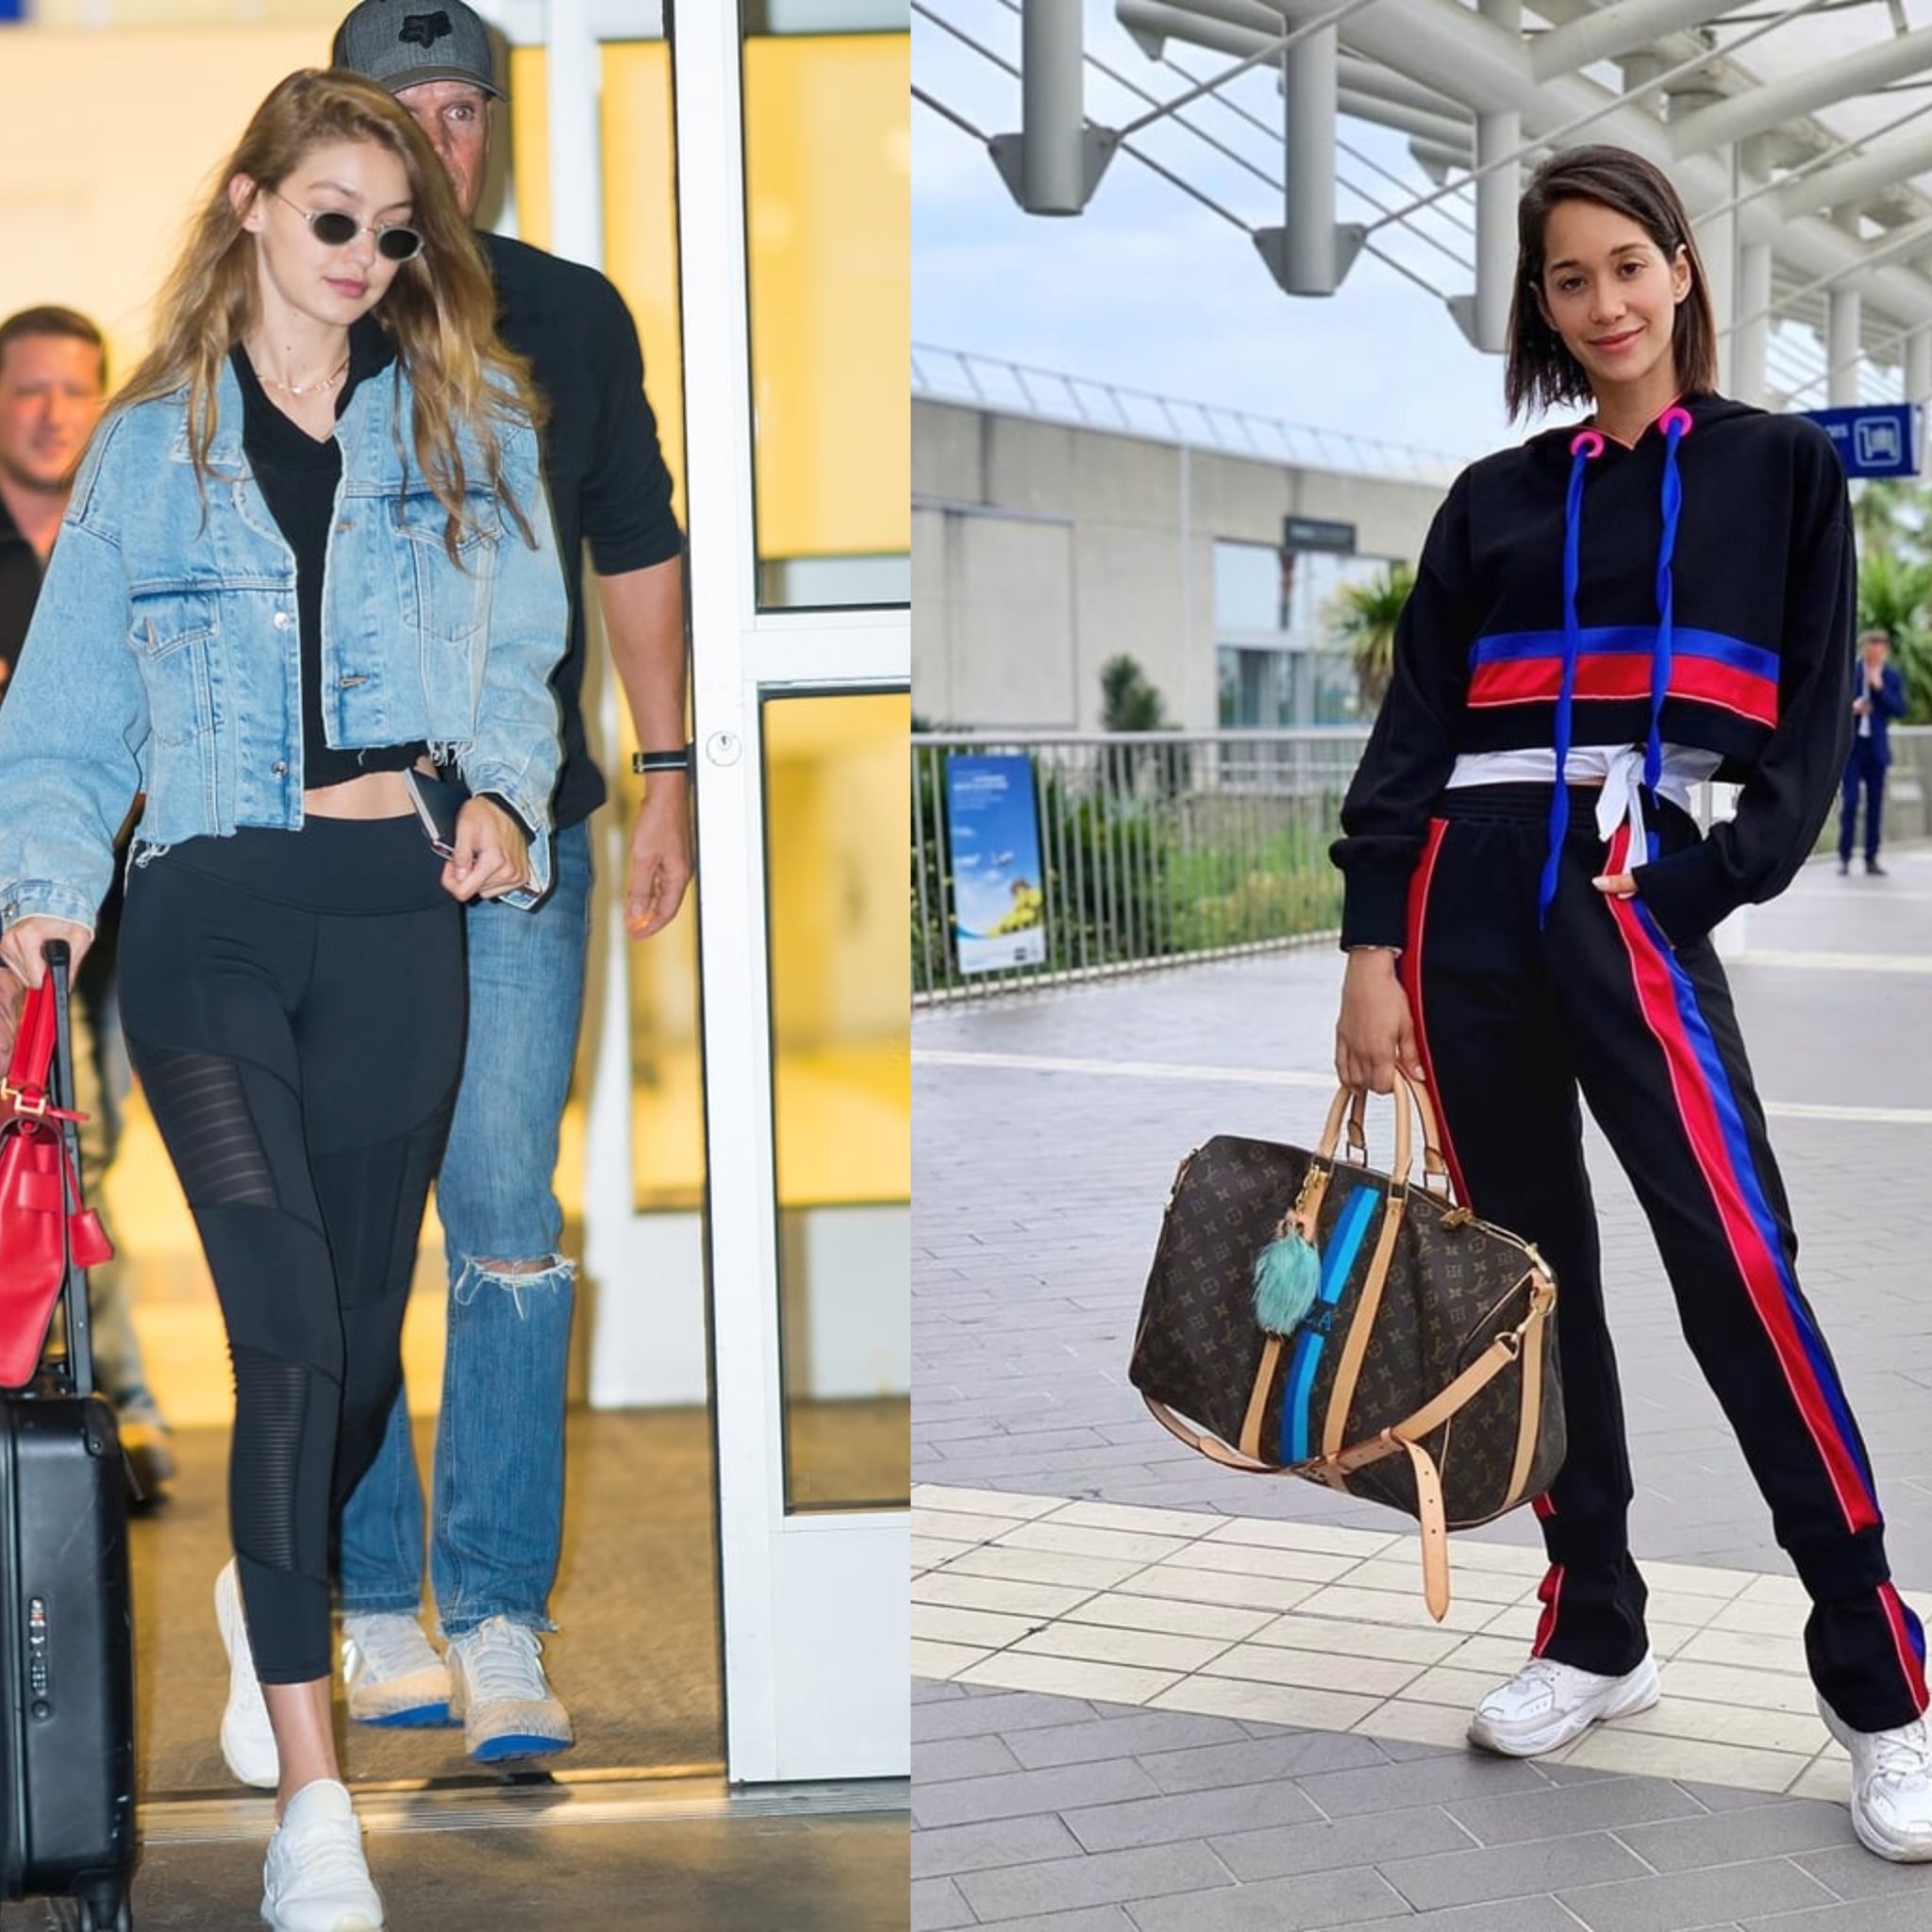 Fall Celebrity Airport Style Inspired By Olivia Munn & Rita Ora